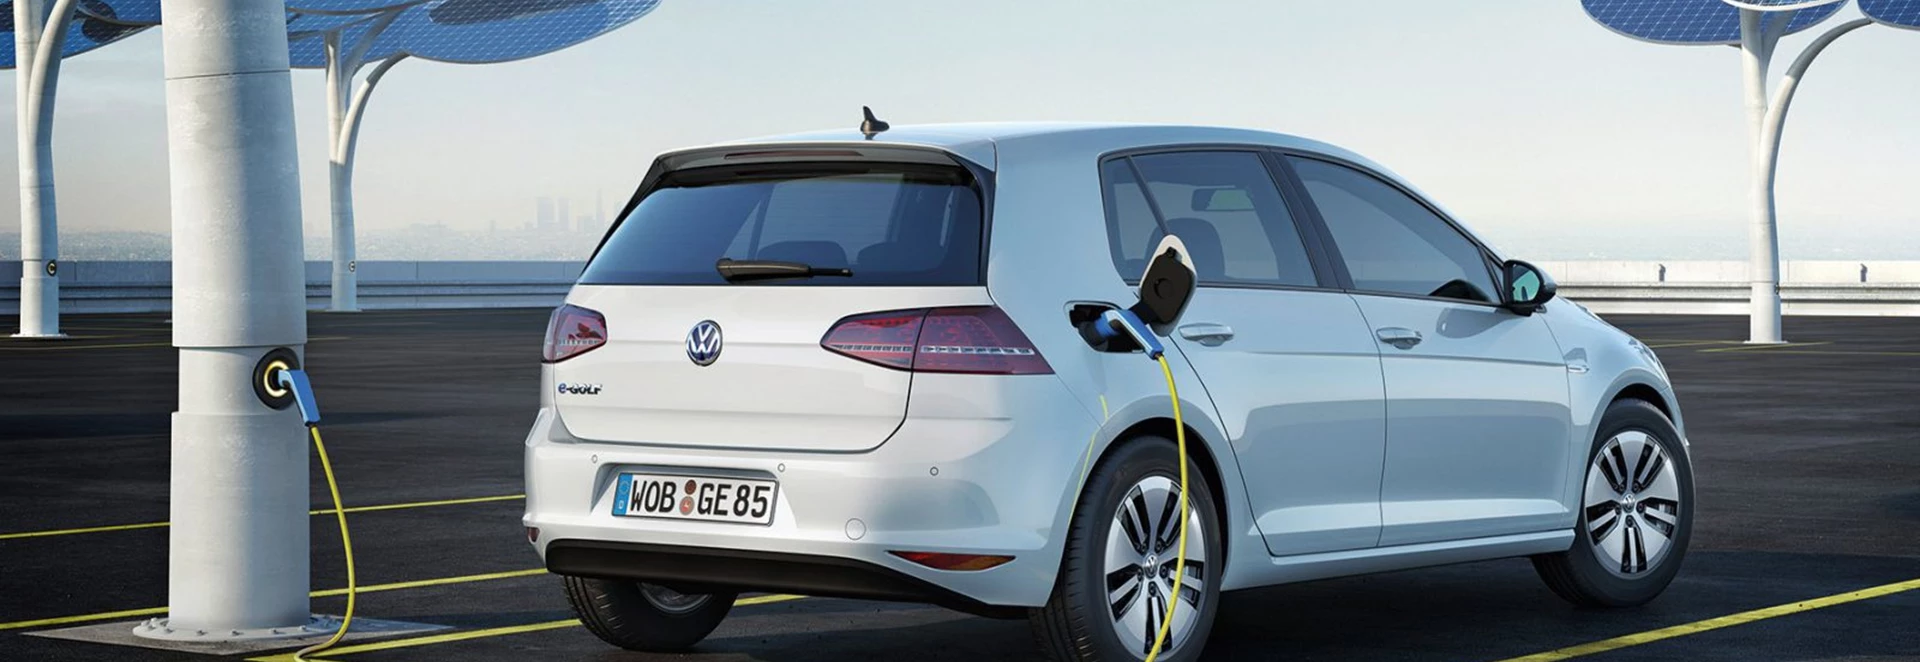 Volkswagen shifts focus to electric cars post-Dieselgate